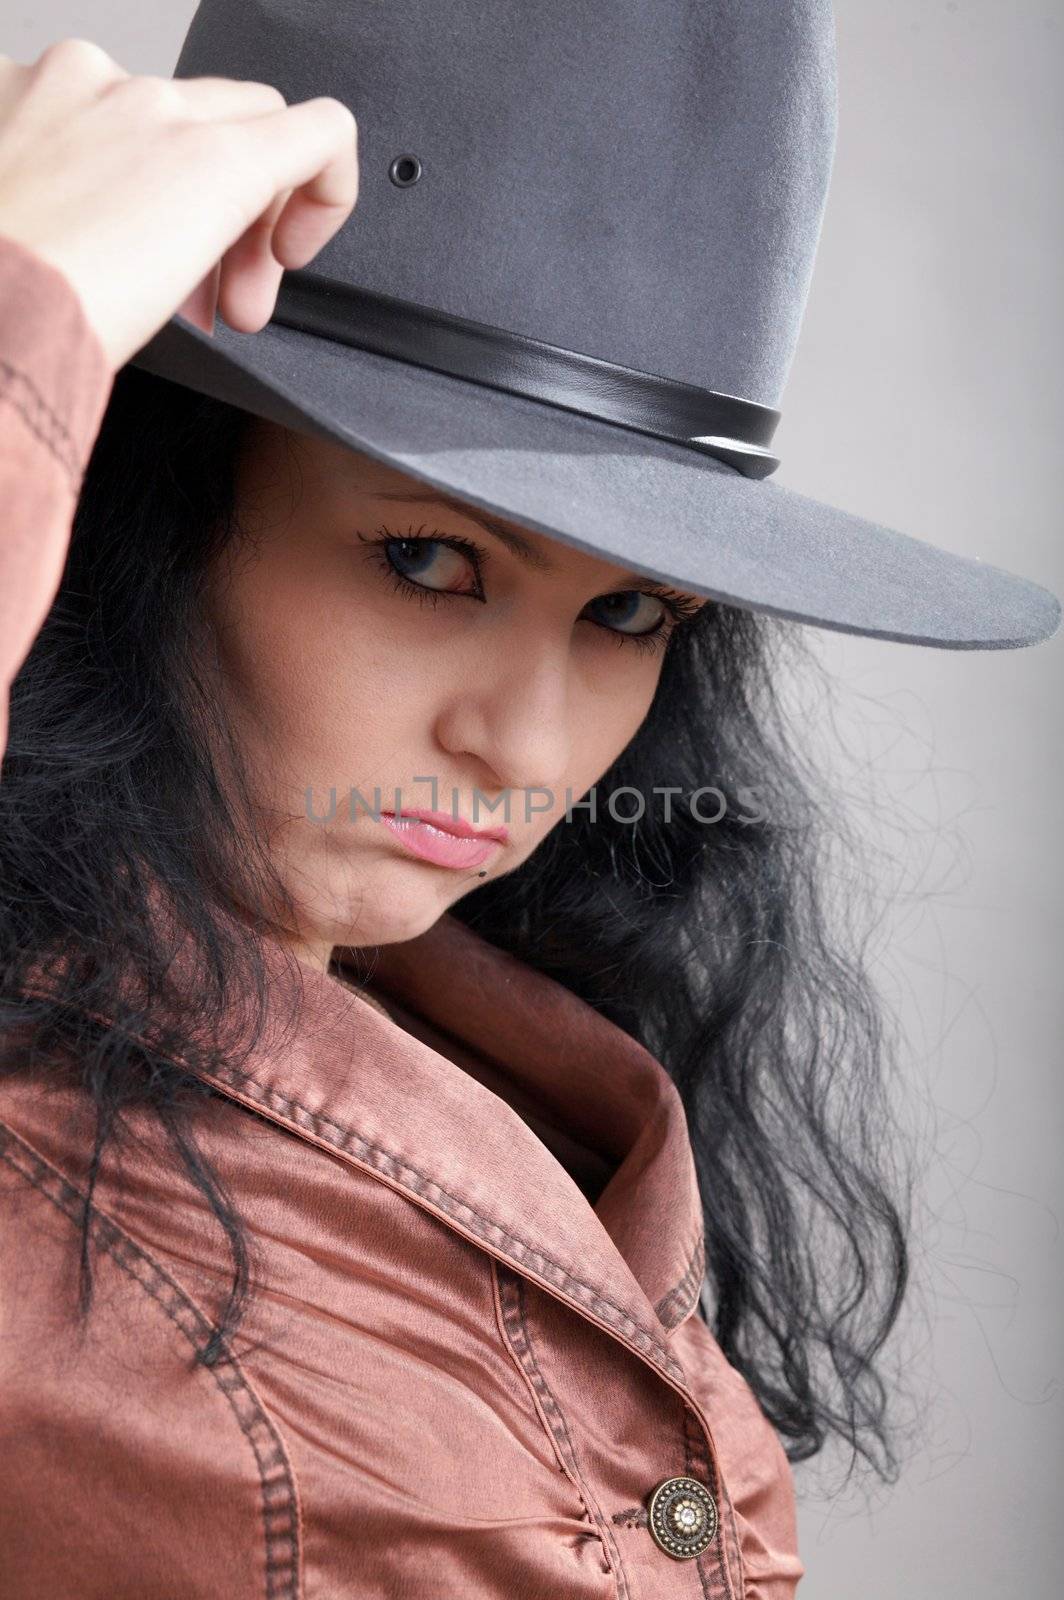 An image of a nice woman in felt hat